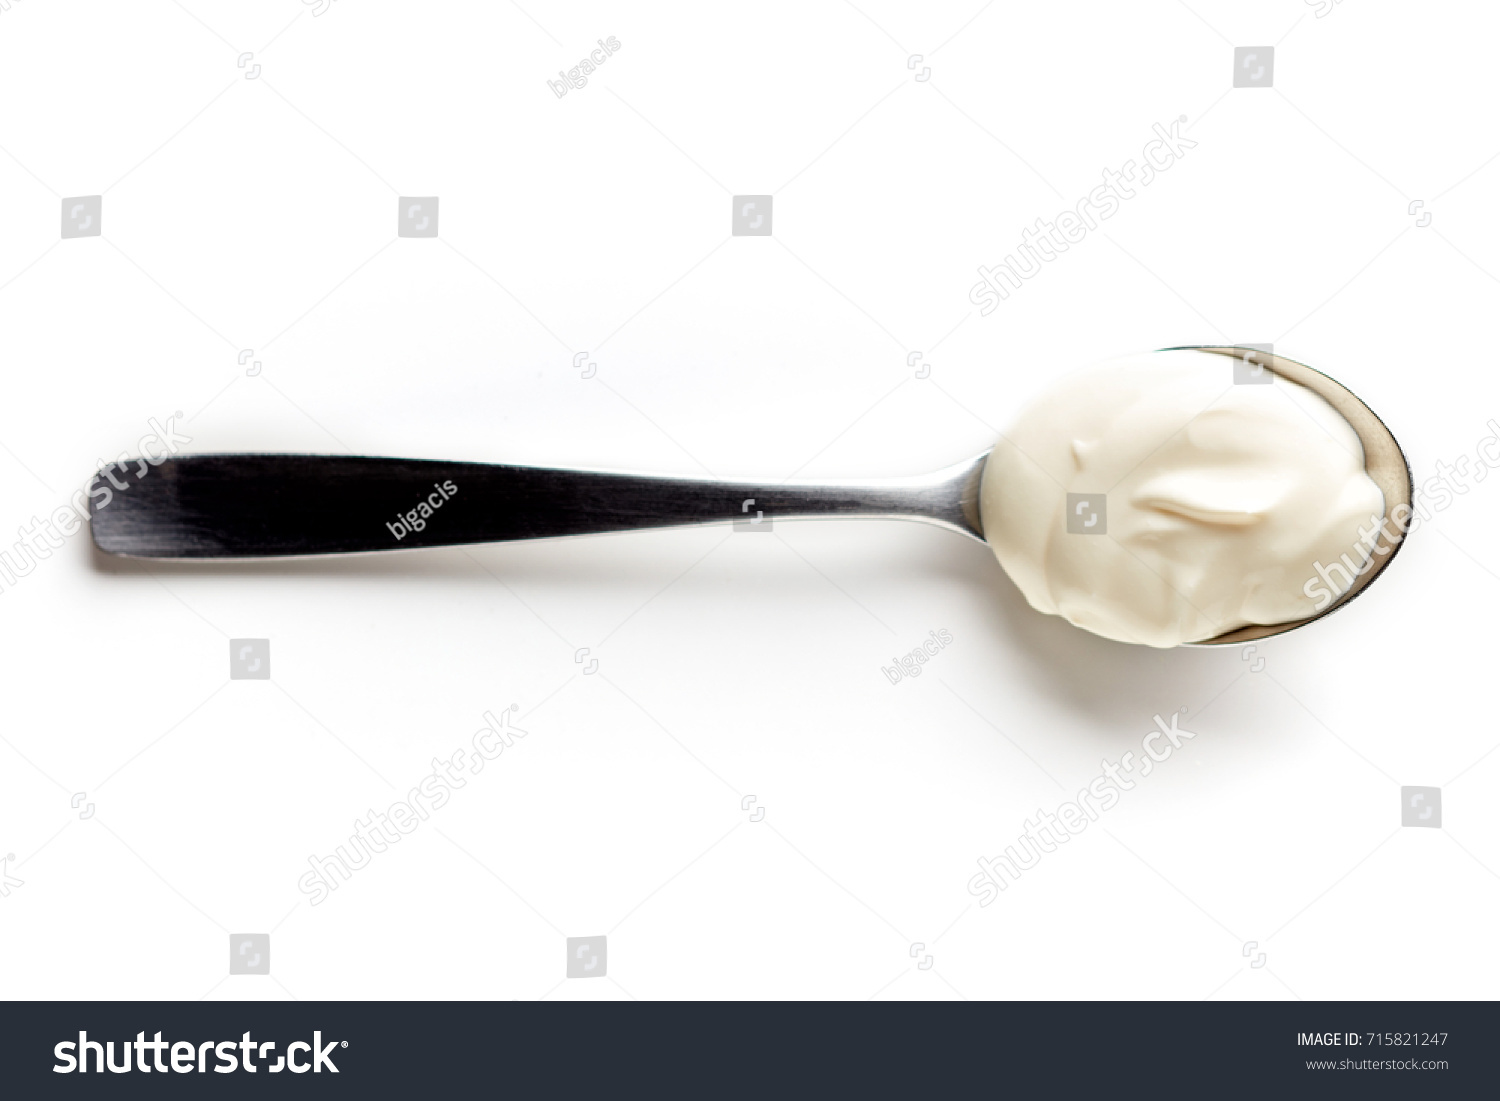 Sour cream in a spoon, isolated on white background, top view #715821247